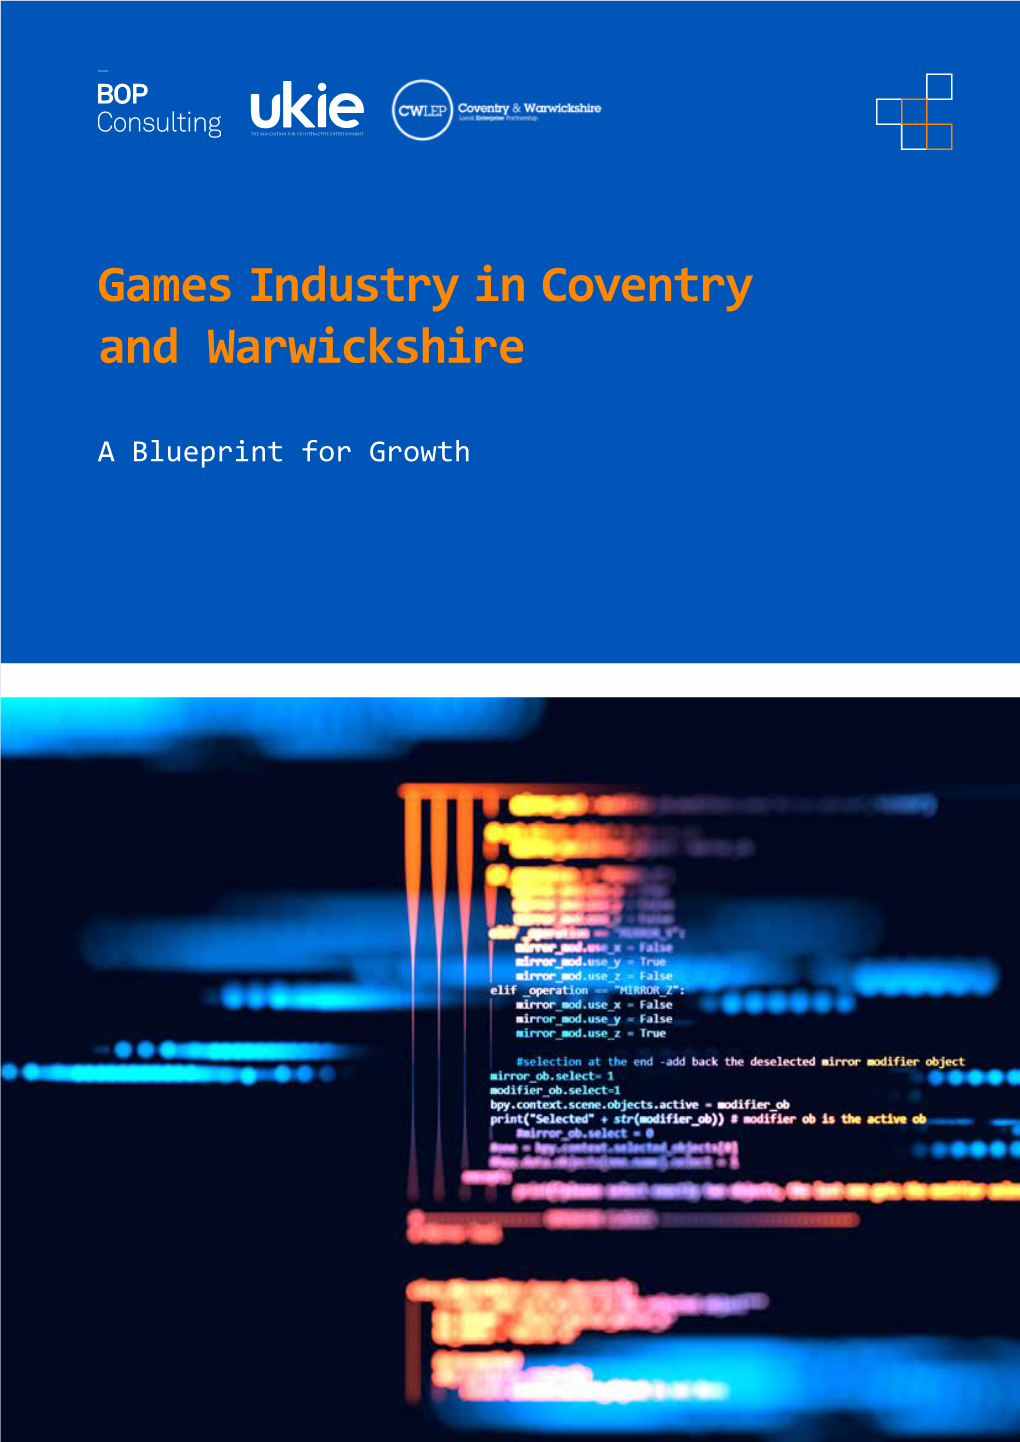 Games Industry in Coventry and Warwickshire